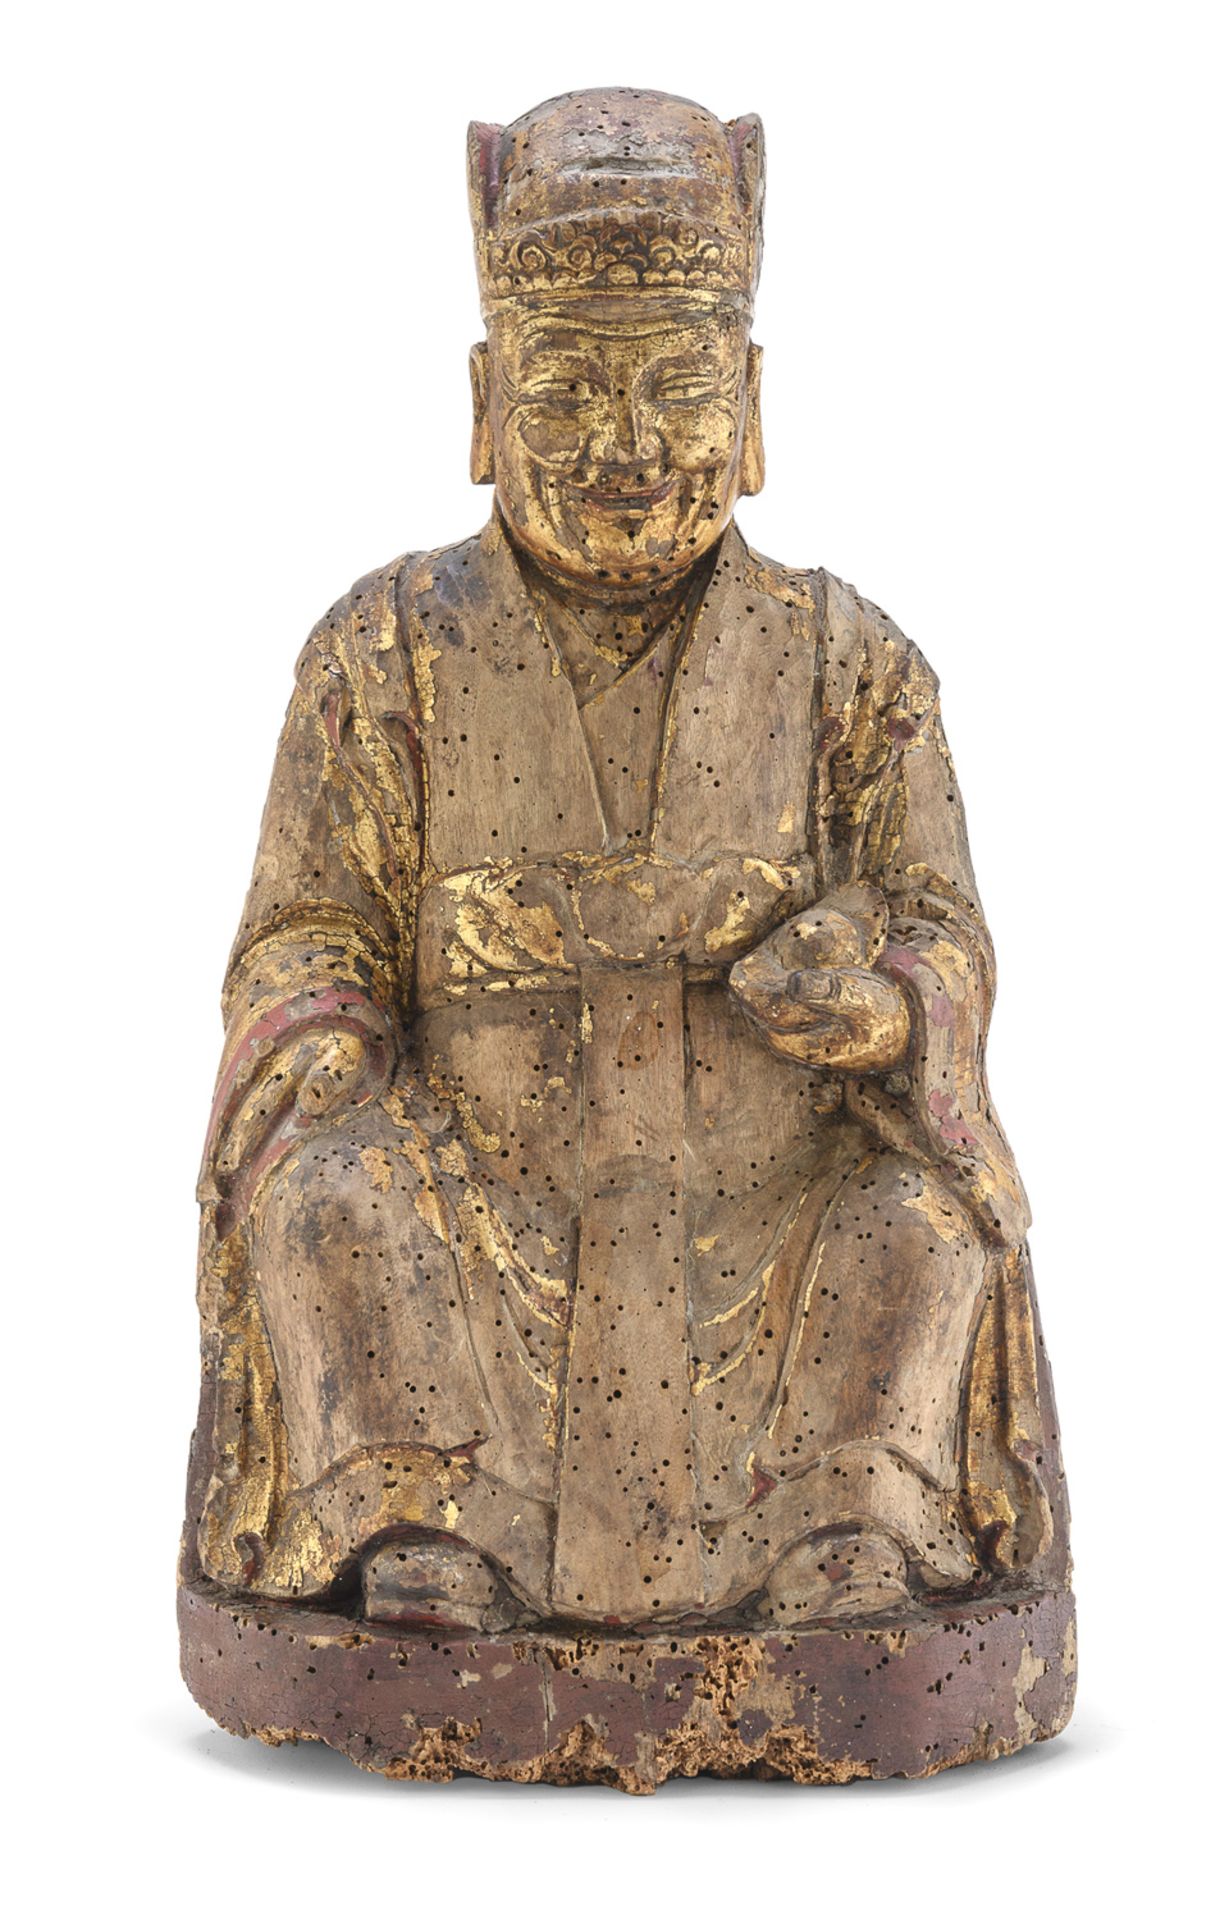 A CHINESE RED AND GOLD LACQUERED WOOD SCULPTURE OF CAI SHEN LATE 19TH CENTURY.